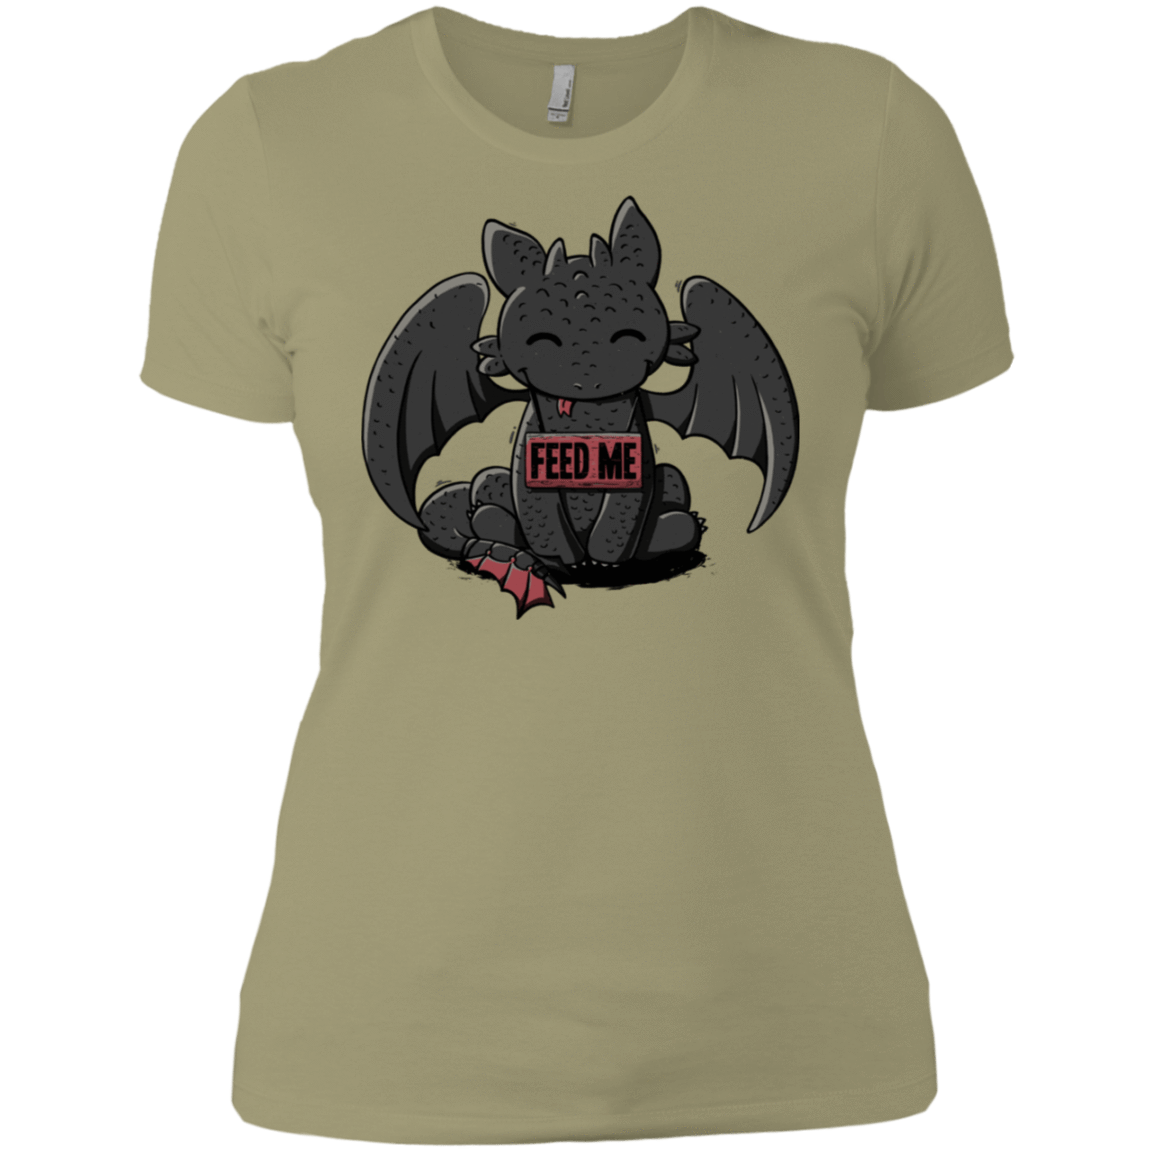 T-Shirts Light Olive / X-Small Toothless Feed Me Women's Premium T-Shirt